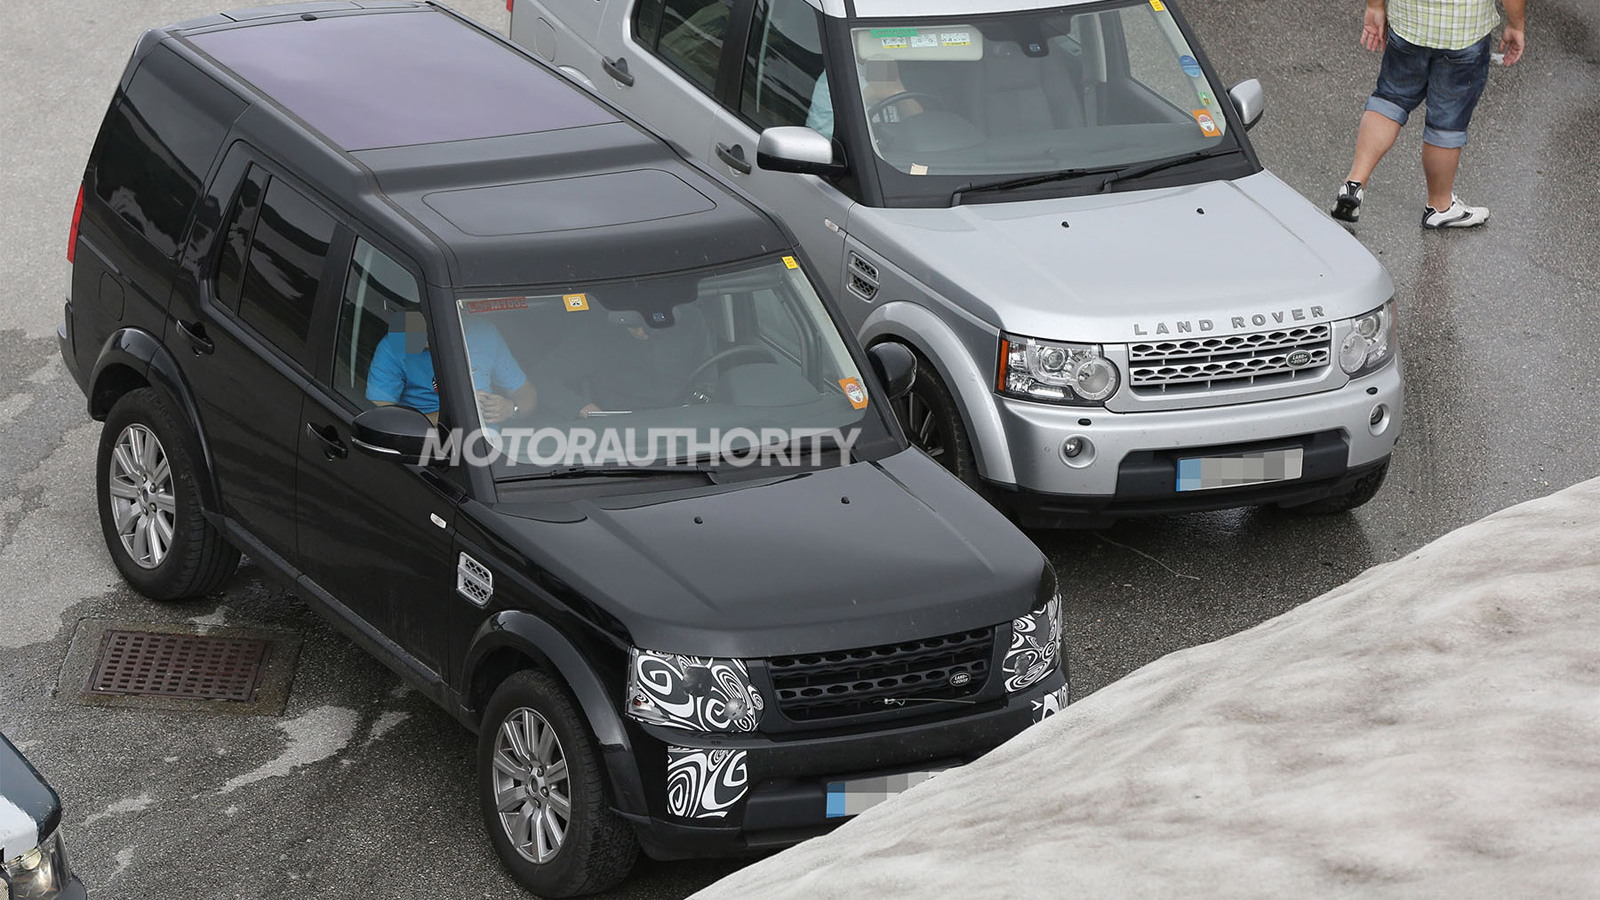 2014 Land Rover LR4 (Discovery) facelift spy shots